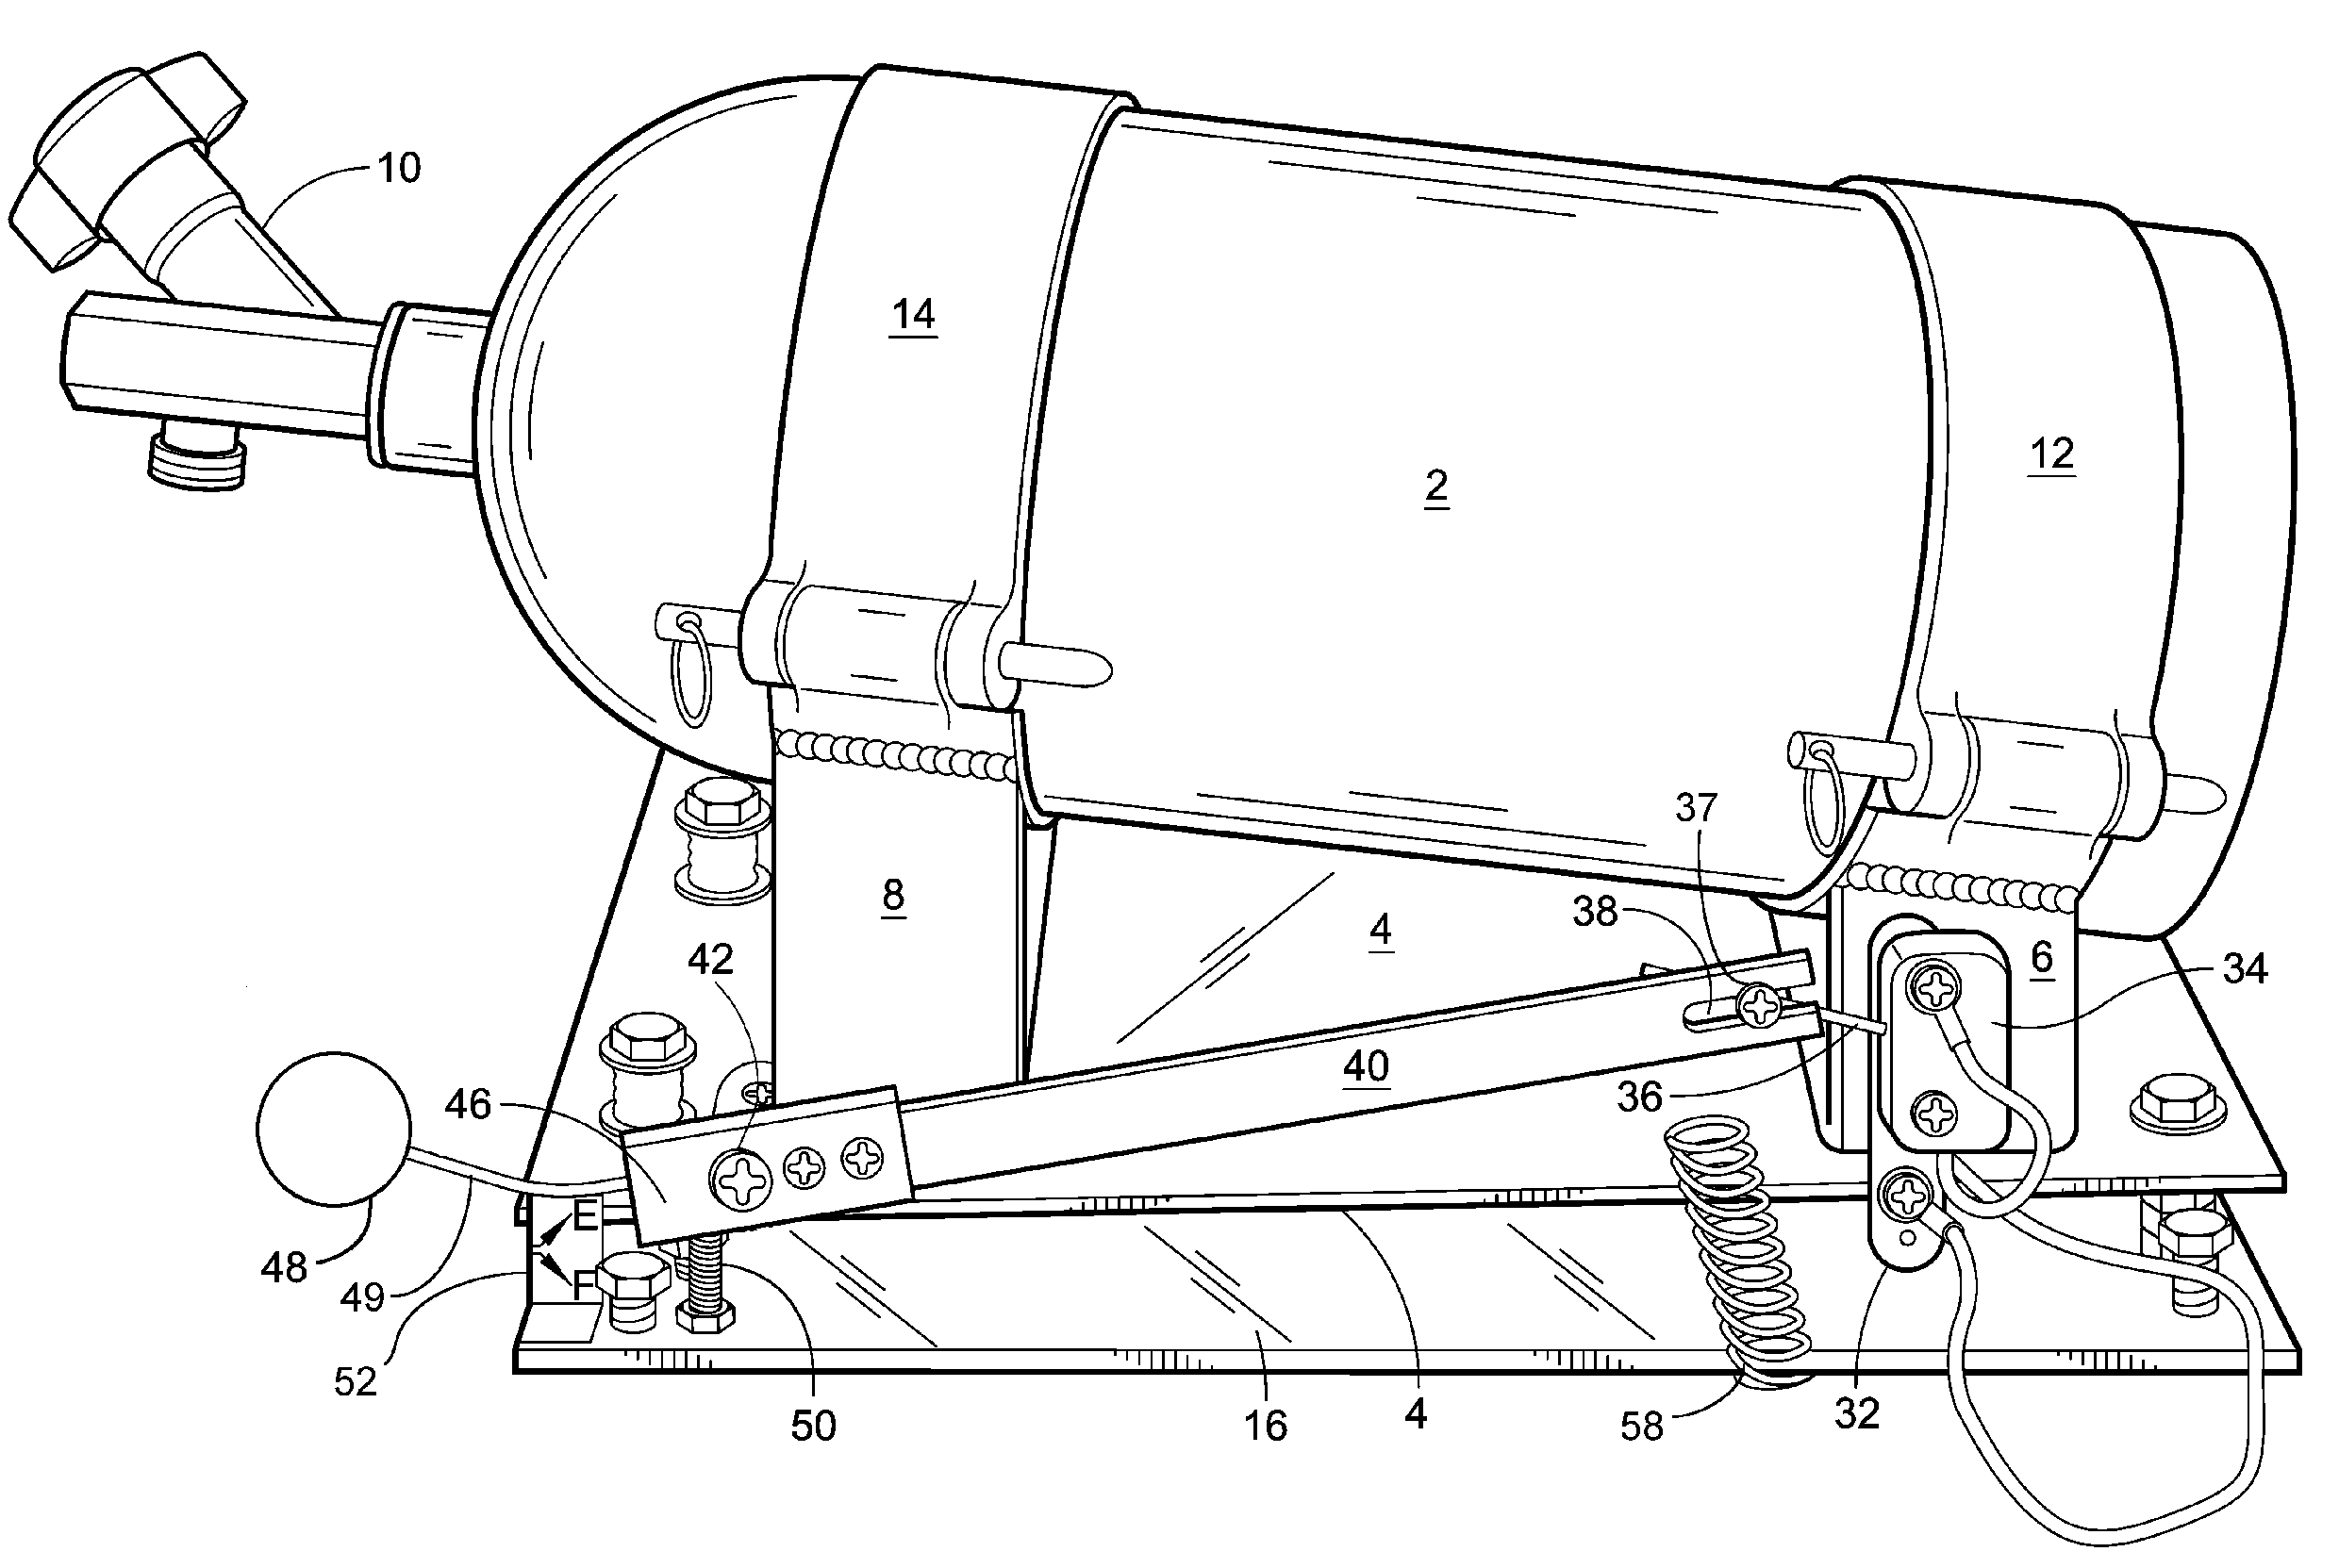 Apparatus for securely mounting and continuously monitoring the weight of a liquified gas tank